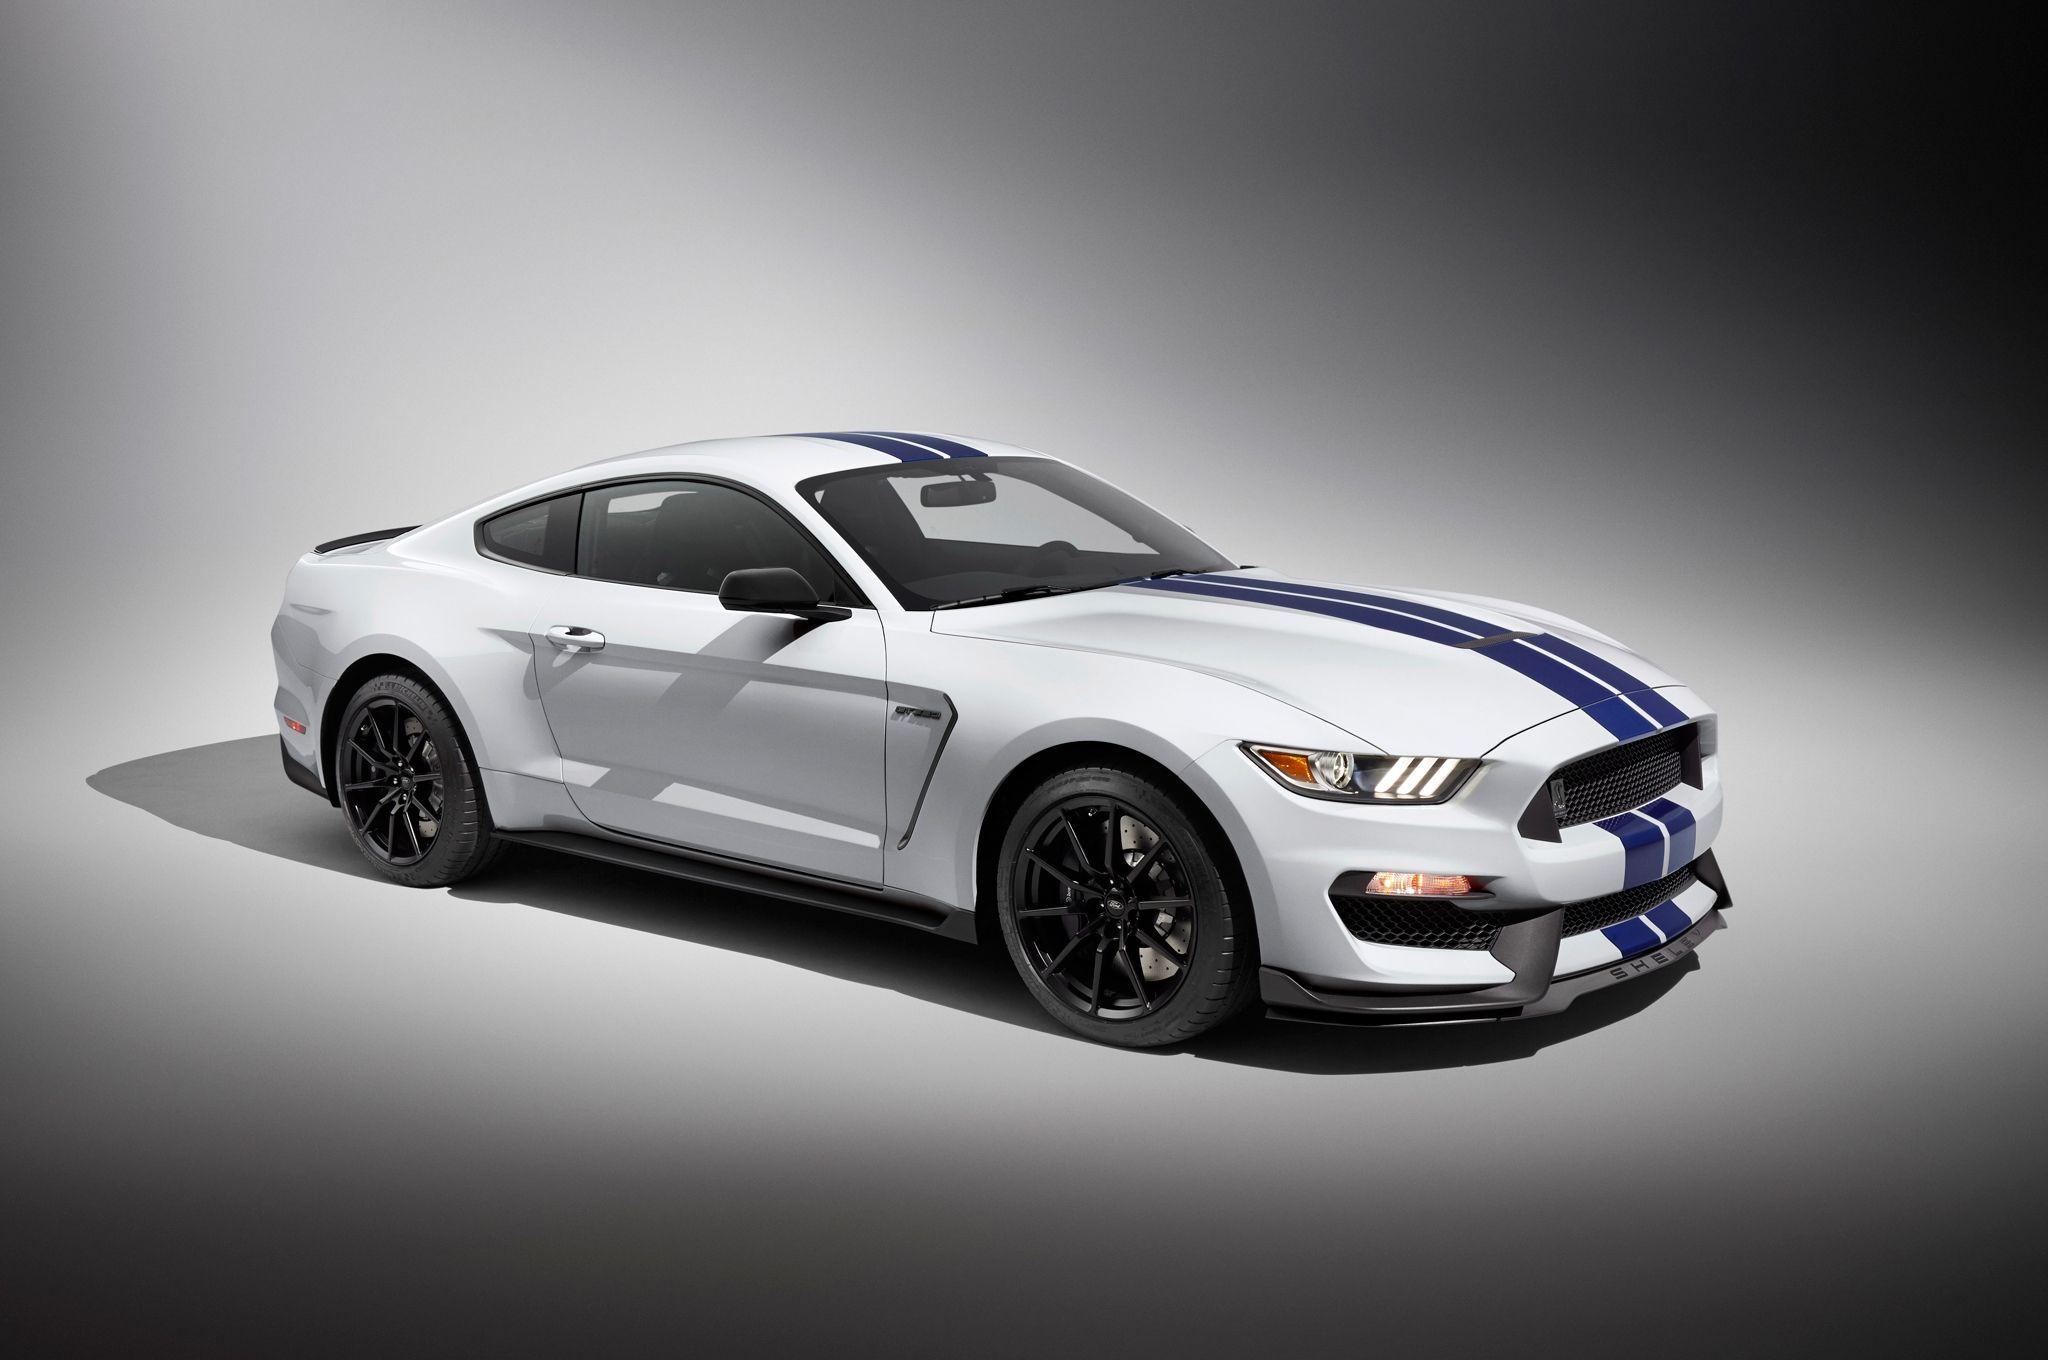 Ford Mustang Shelby GT350 2016 HD wallpaper free download